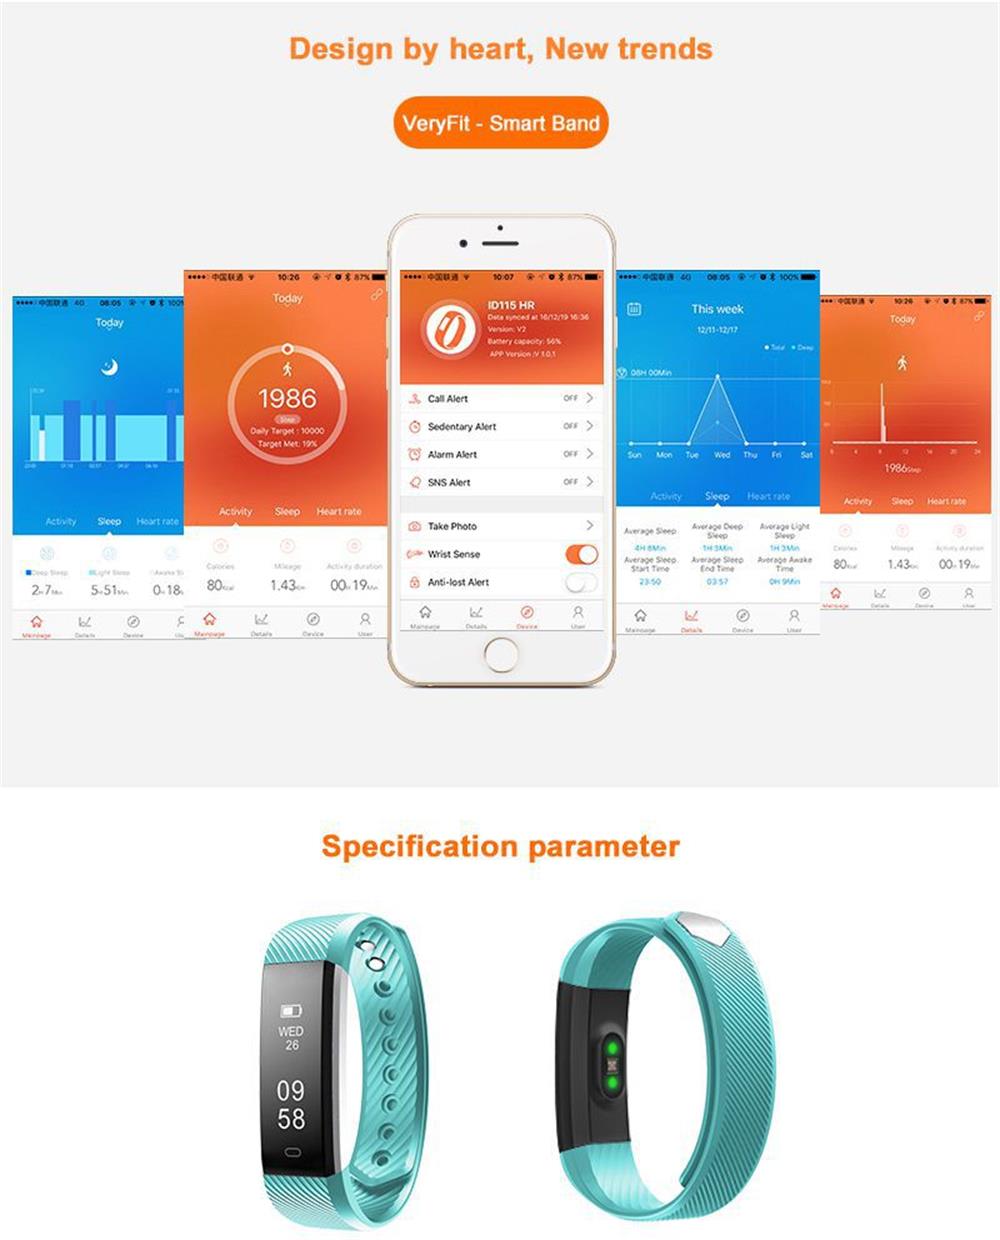 Star 3 Heart Rate Smart Watch Fitness Tracker Band Bracelet Japan Nordic Chip Test Accurate 0.86 Inch Big Screen